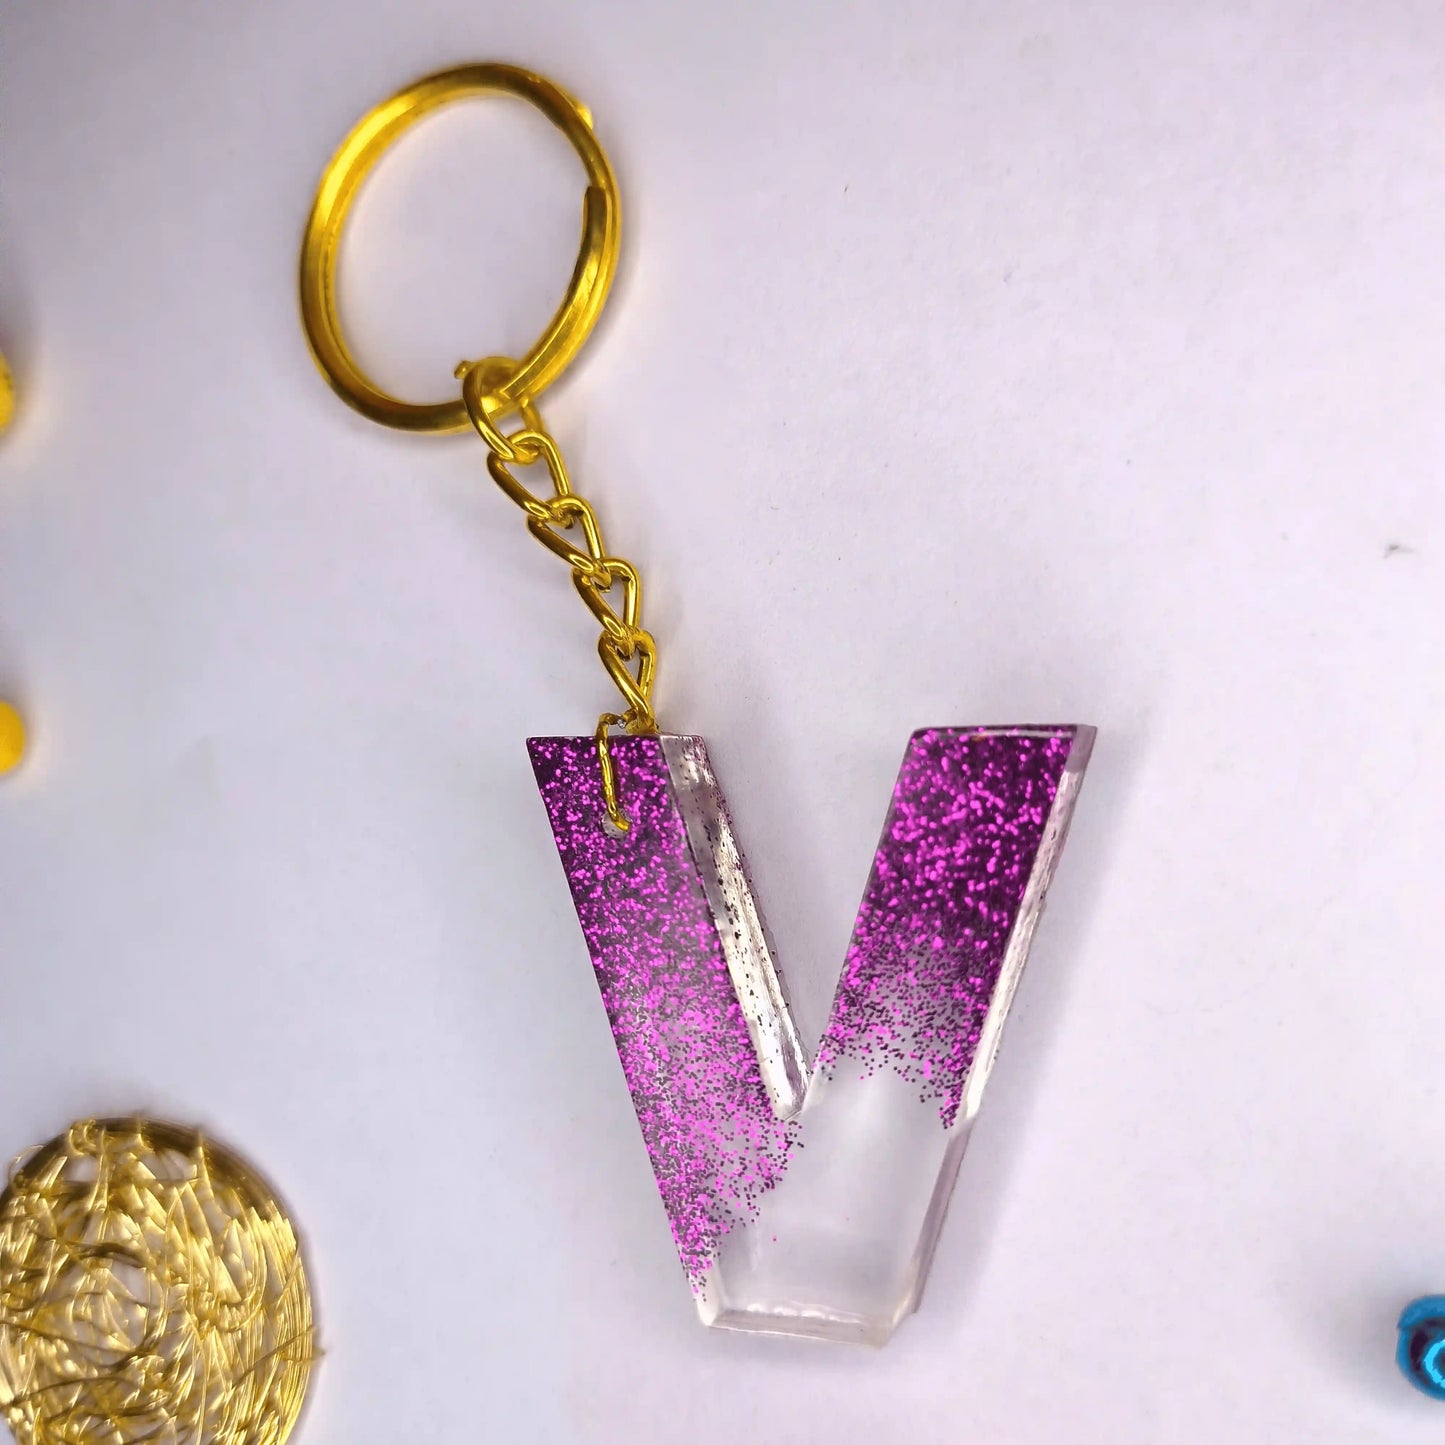 Shop Modern Resin keychains With V initials For Teachers day